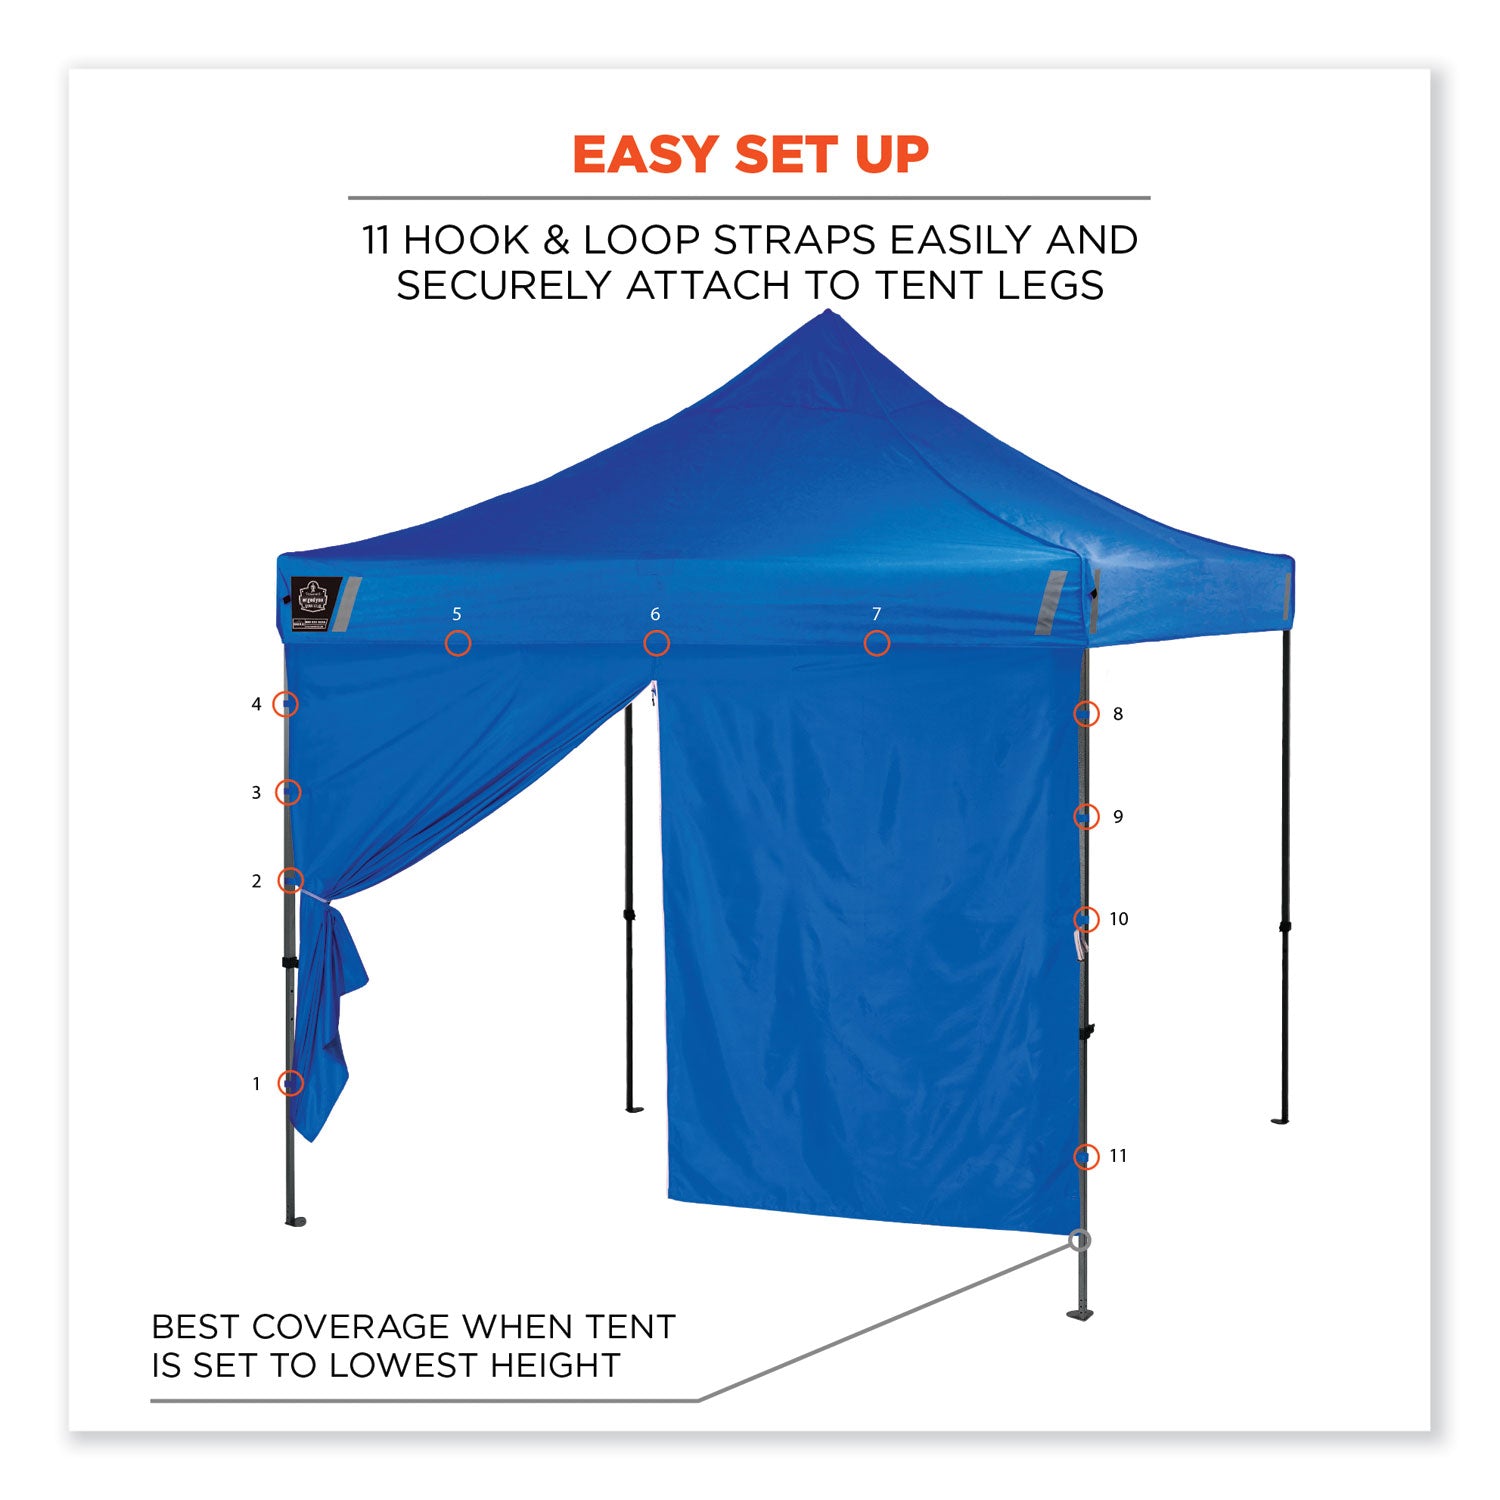 shax-6096-pop-up-tent-sidewall-with-zipper-single-skin-10-ft-x-10-ft-polyester-blue-ships-in-1-3-business-days_ego12979 - 5